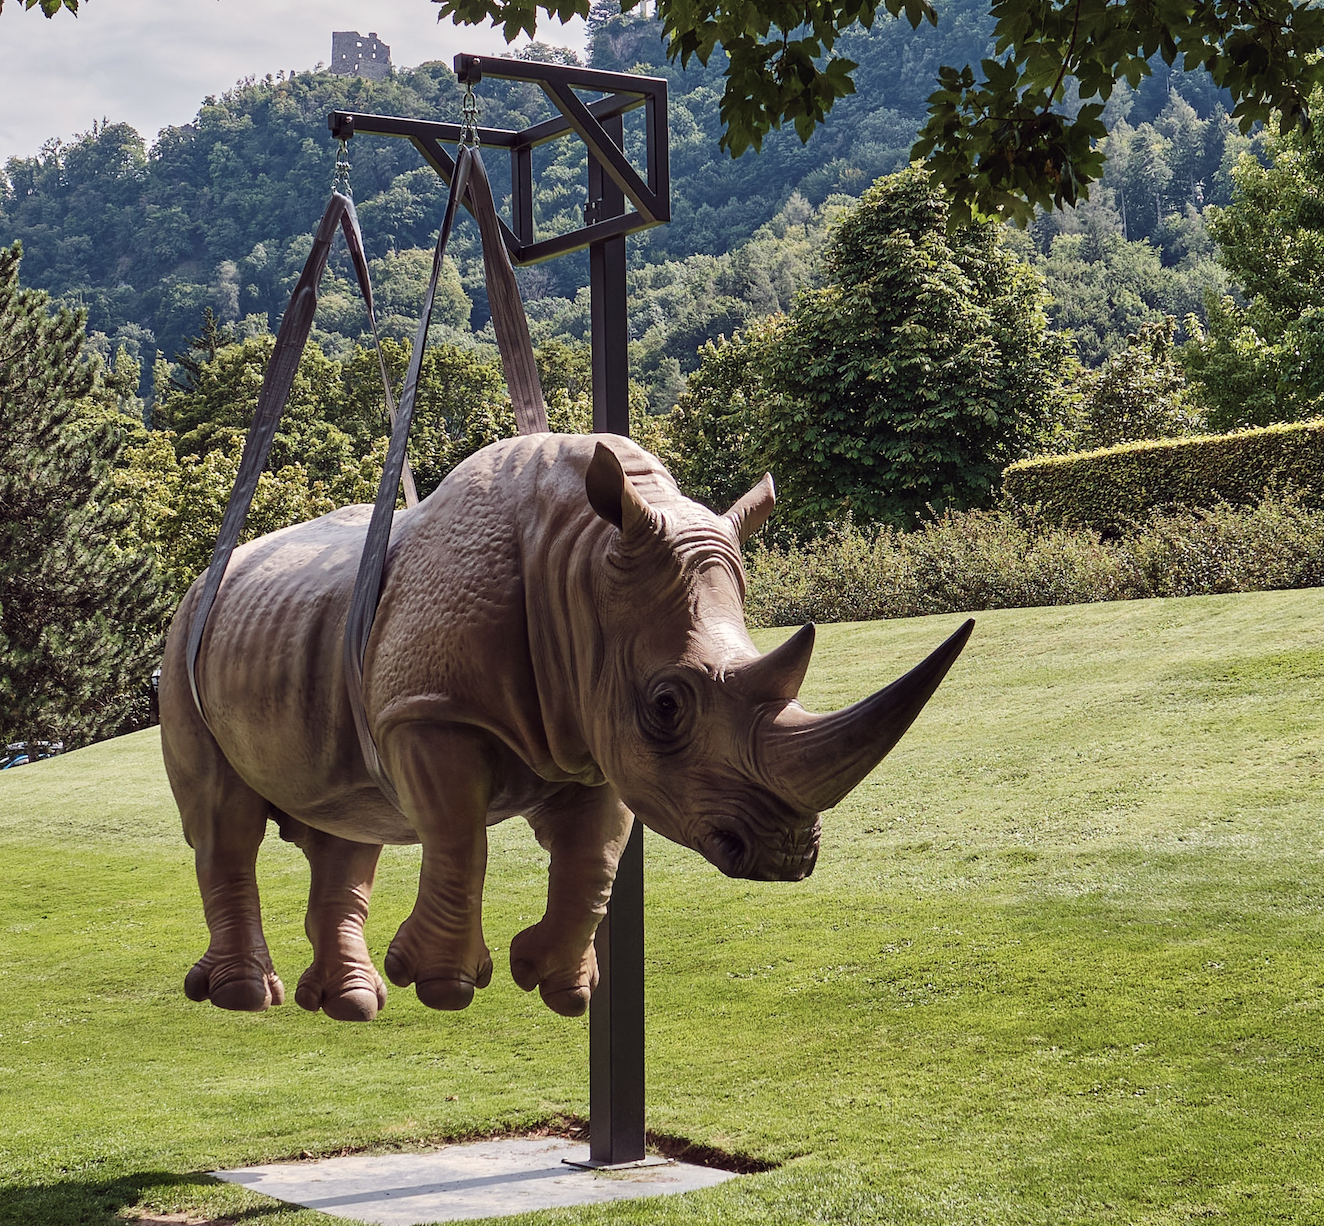 a rhino suspended by straps